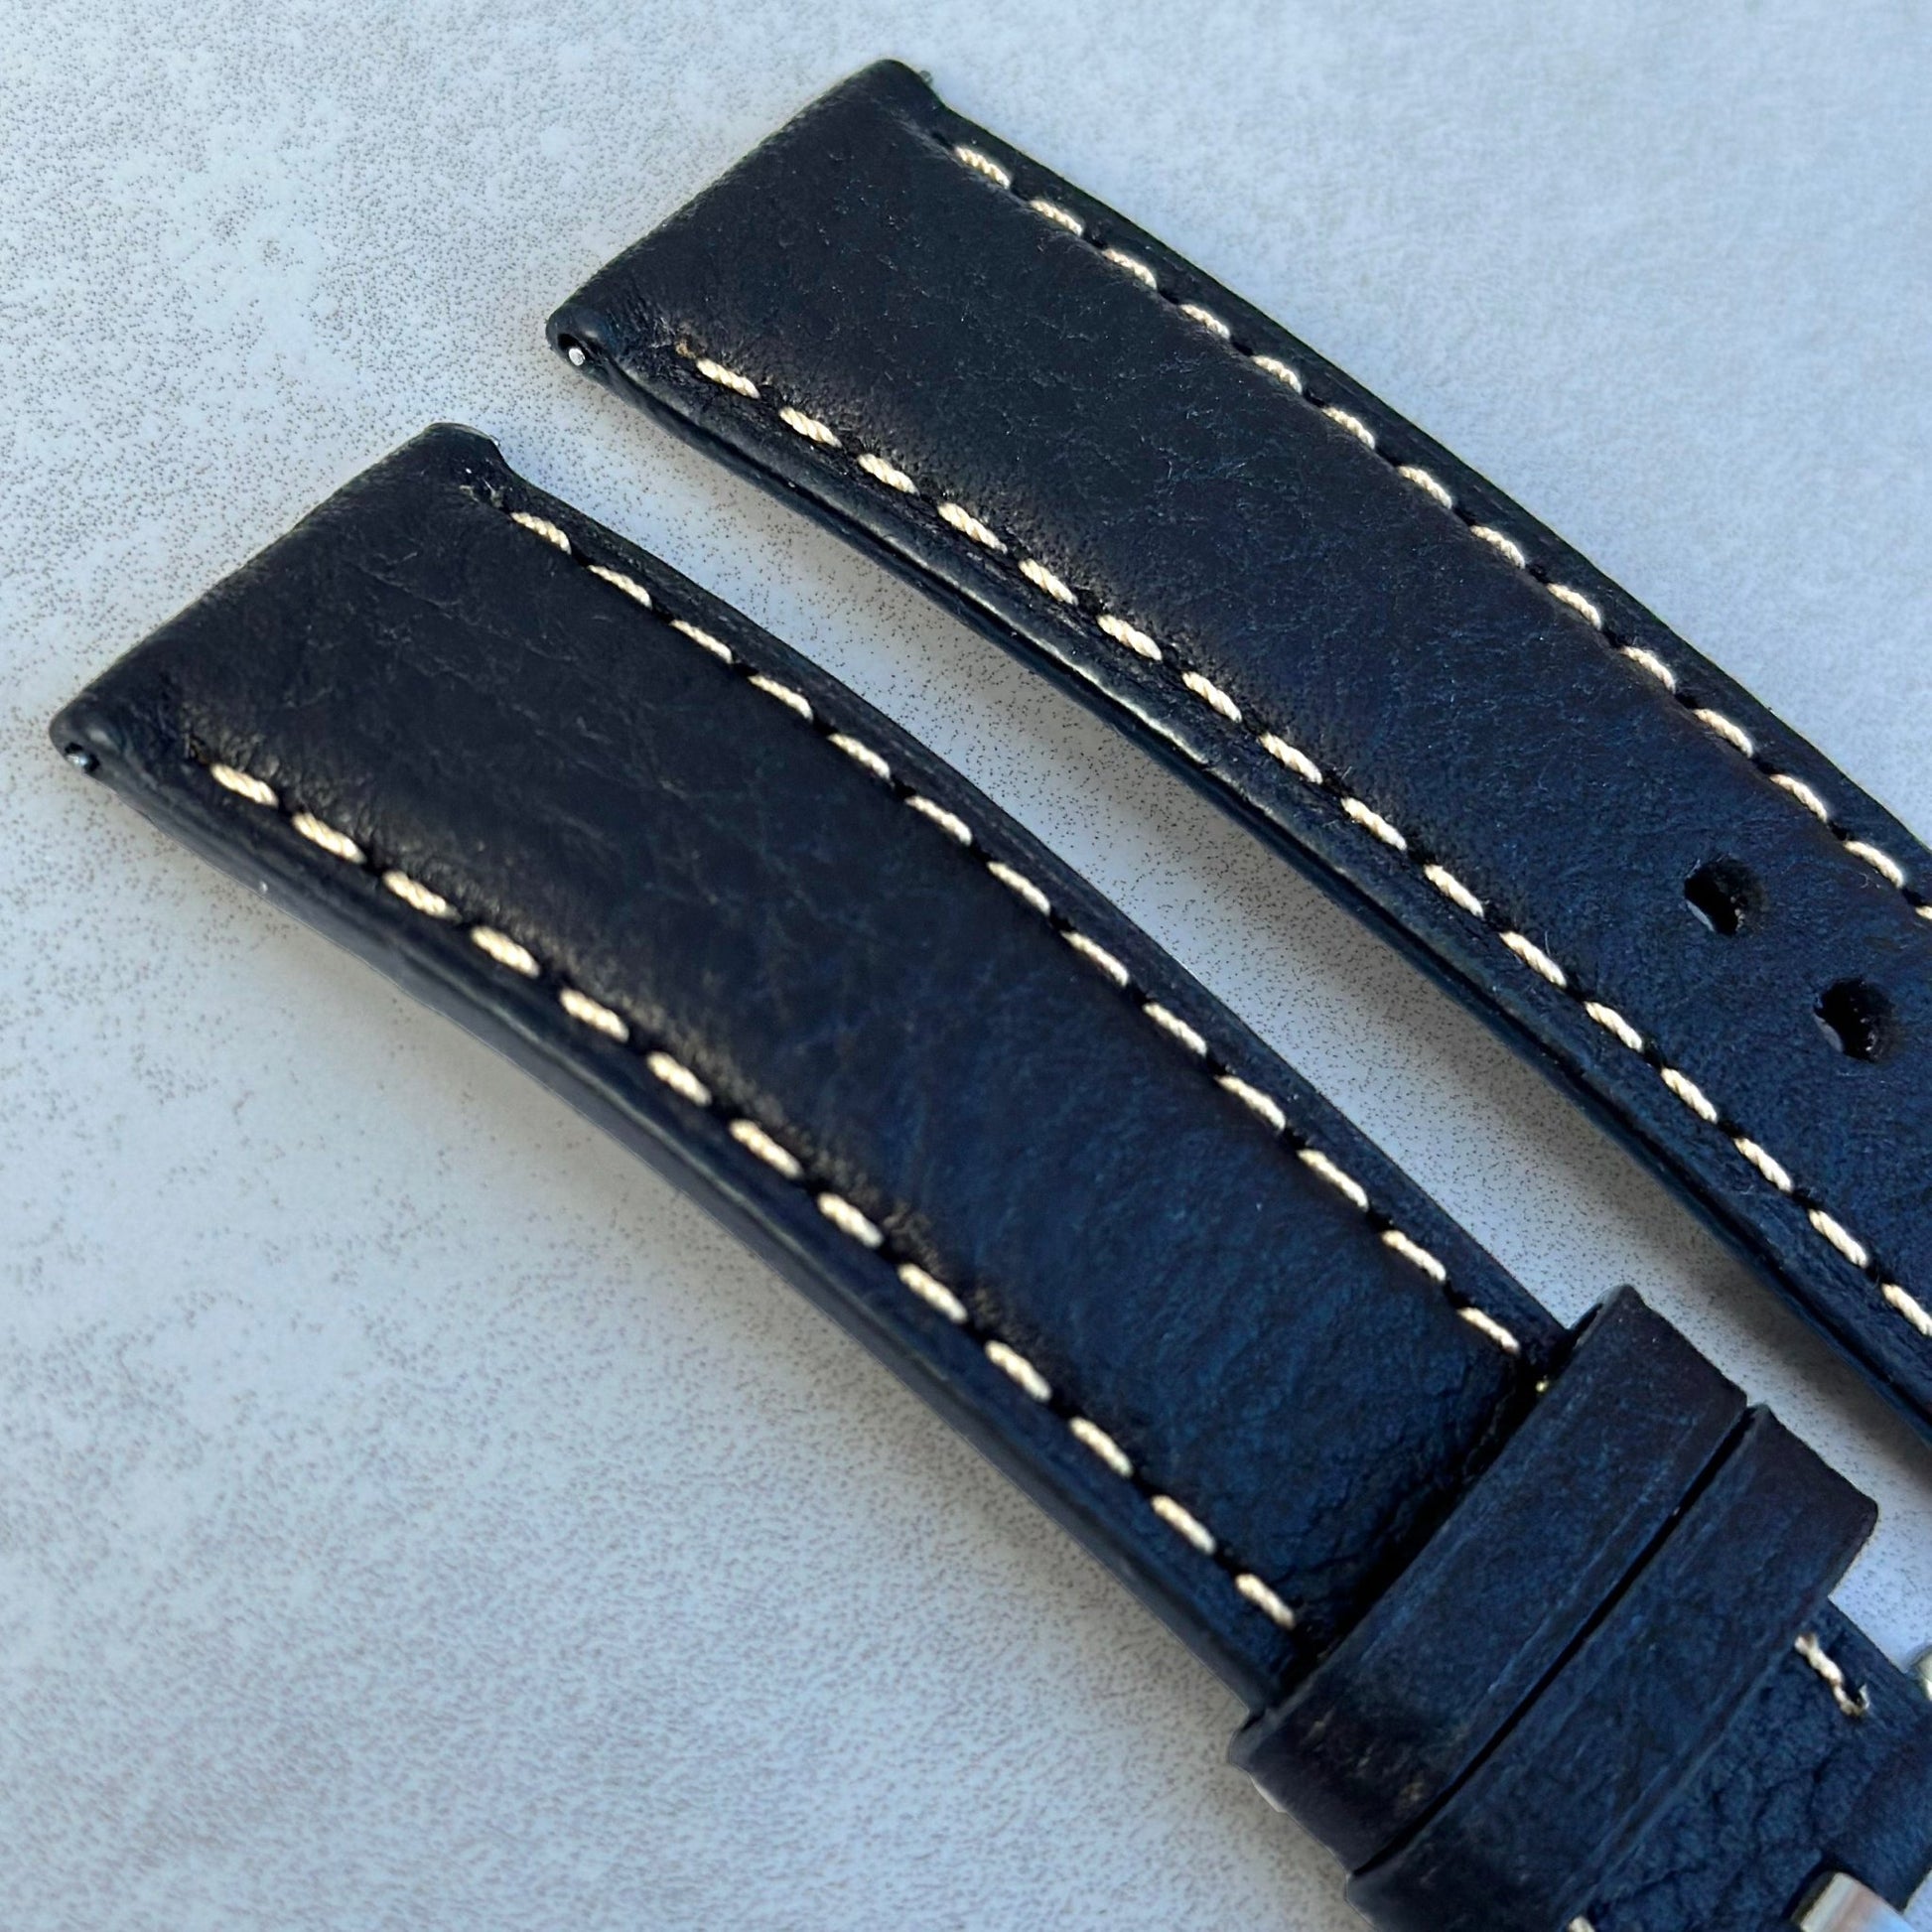 Top of the jet black Italian leather watch strap. Ivory stitching. Padded full grain leather strap. Watch And Strap